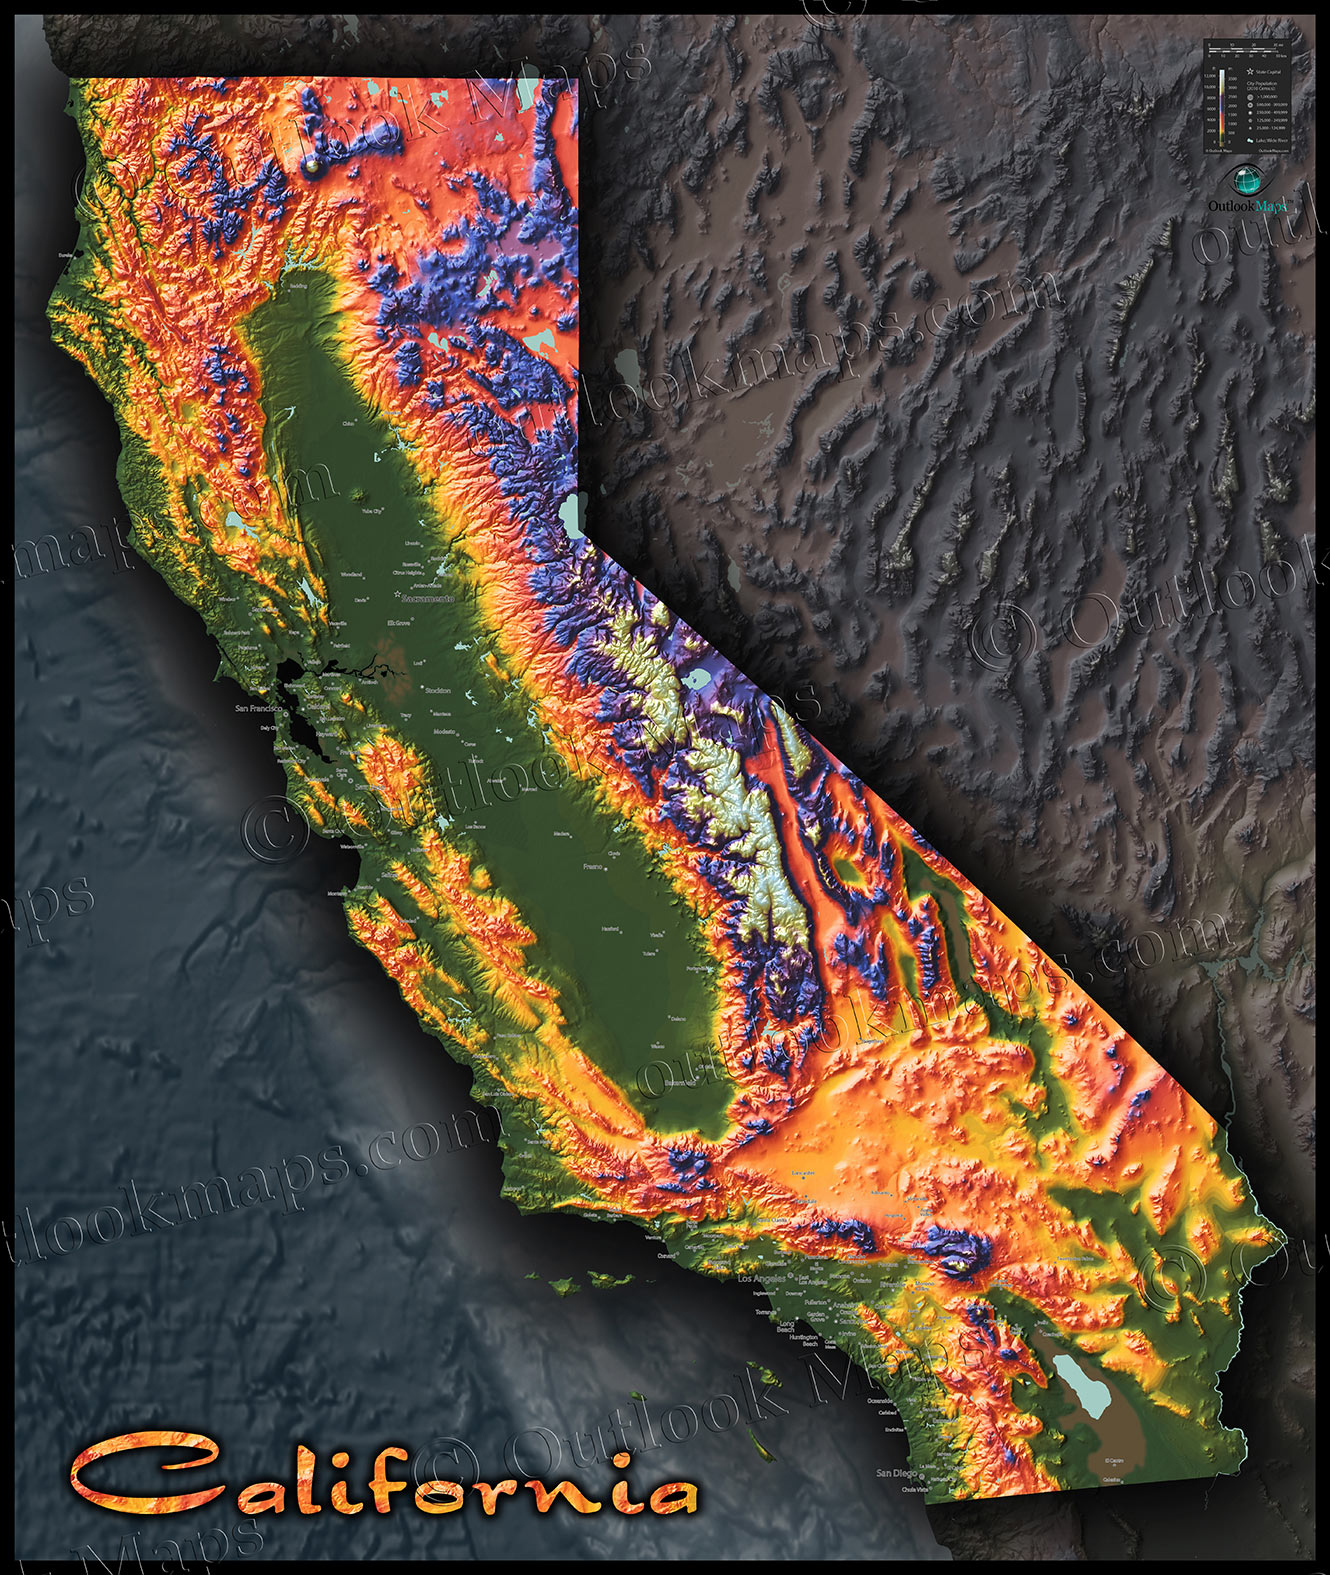 Colorful California Map | Topographical Physical Landscape - California Terrain Map